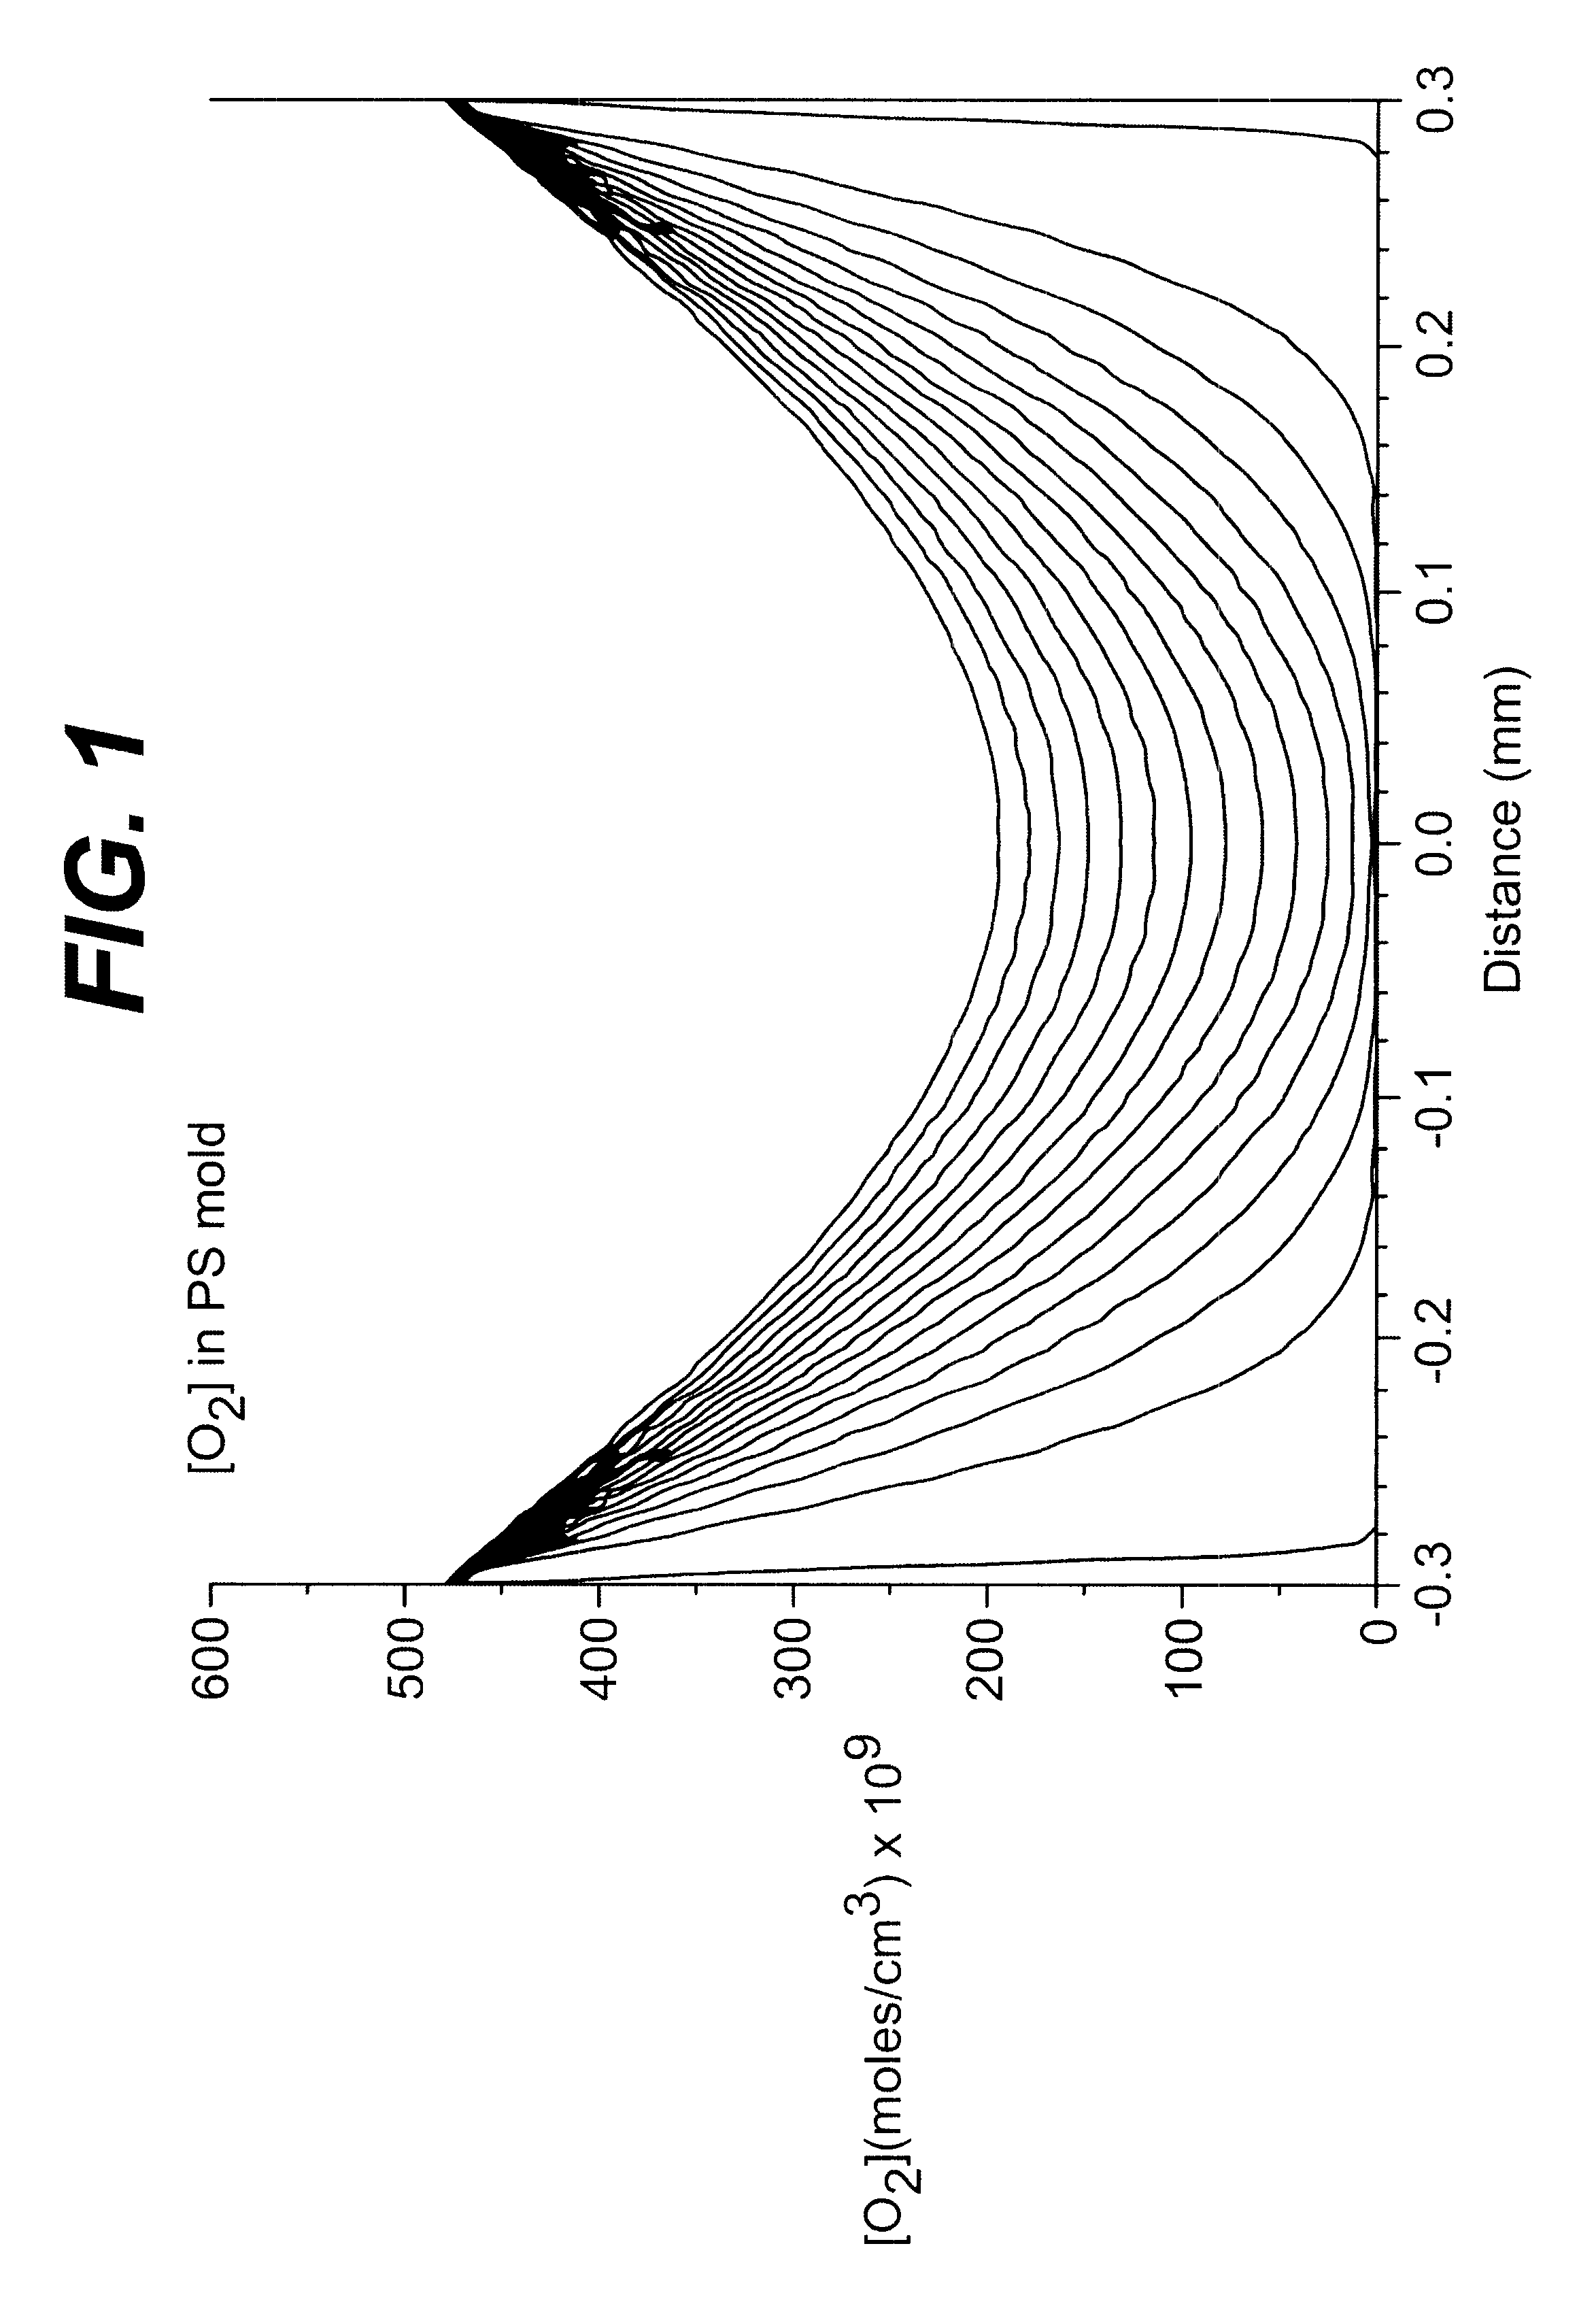 Process of manufacturing contact lenses with measured exposure to oxygen